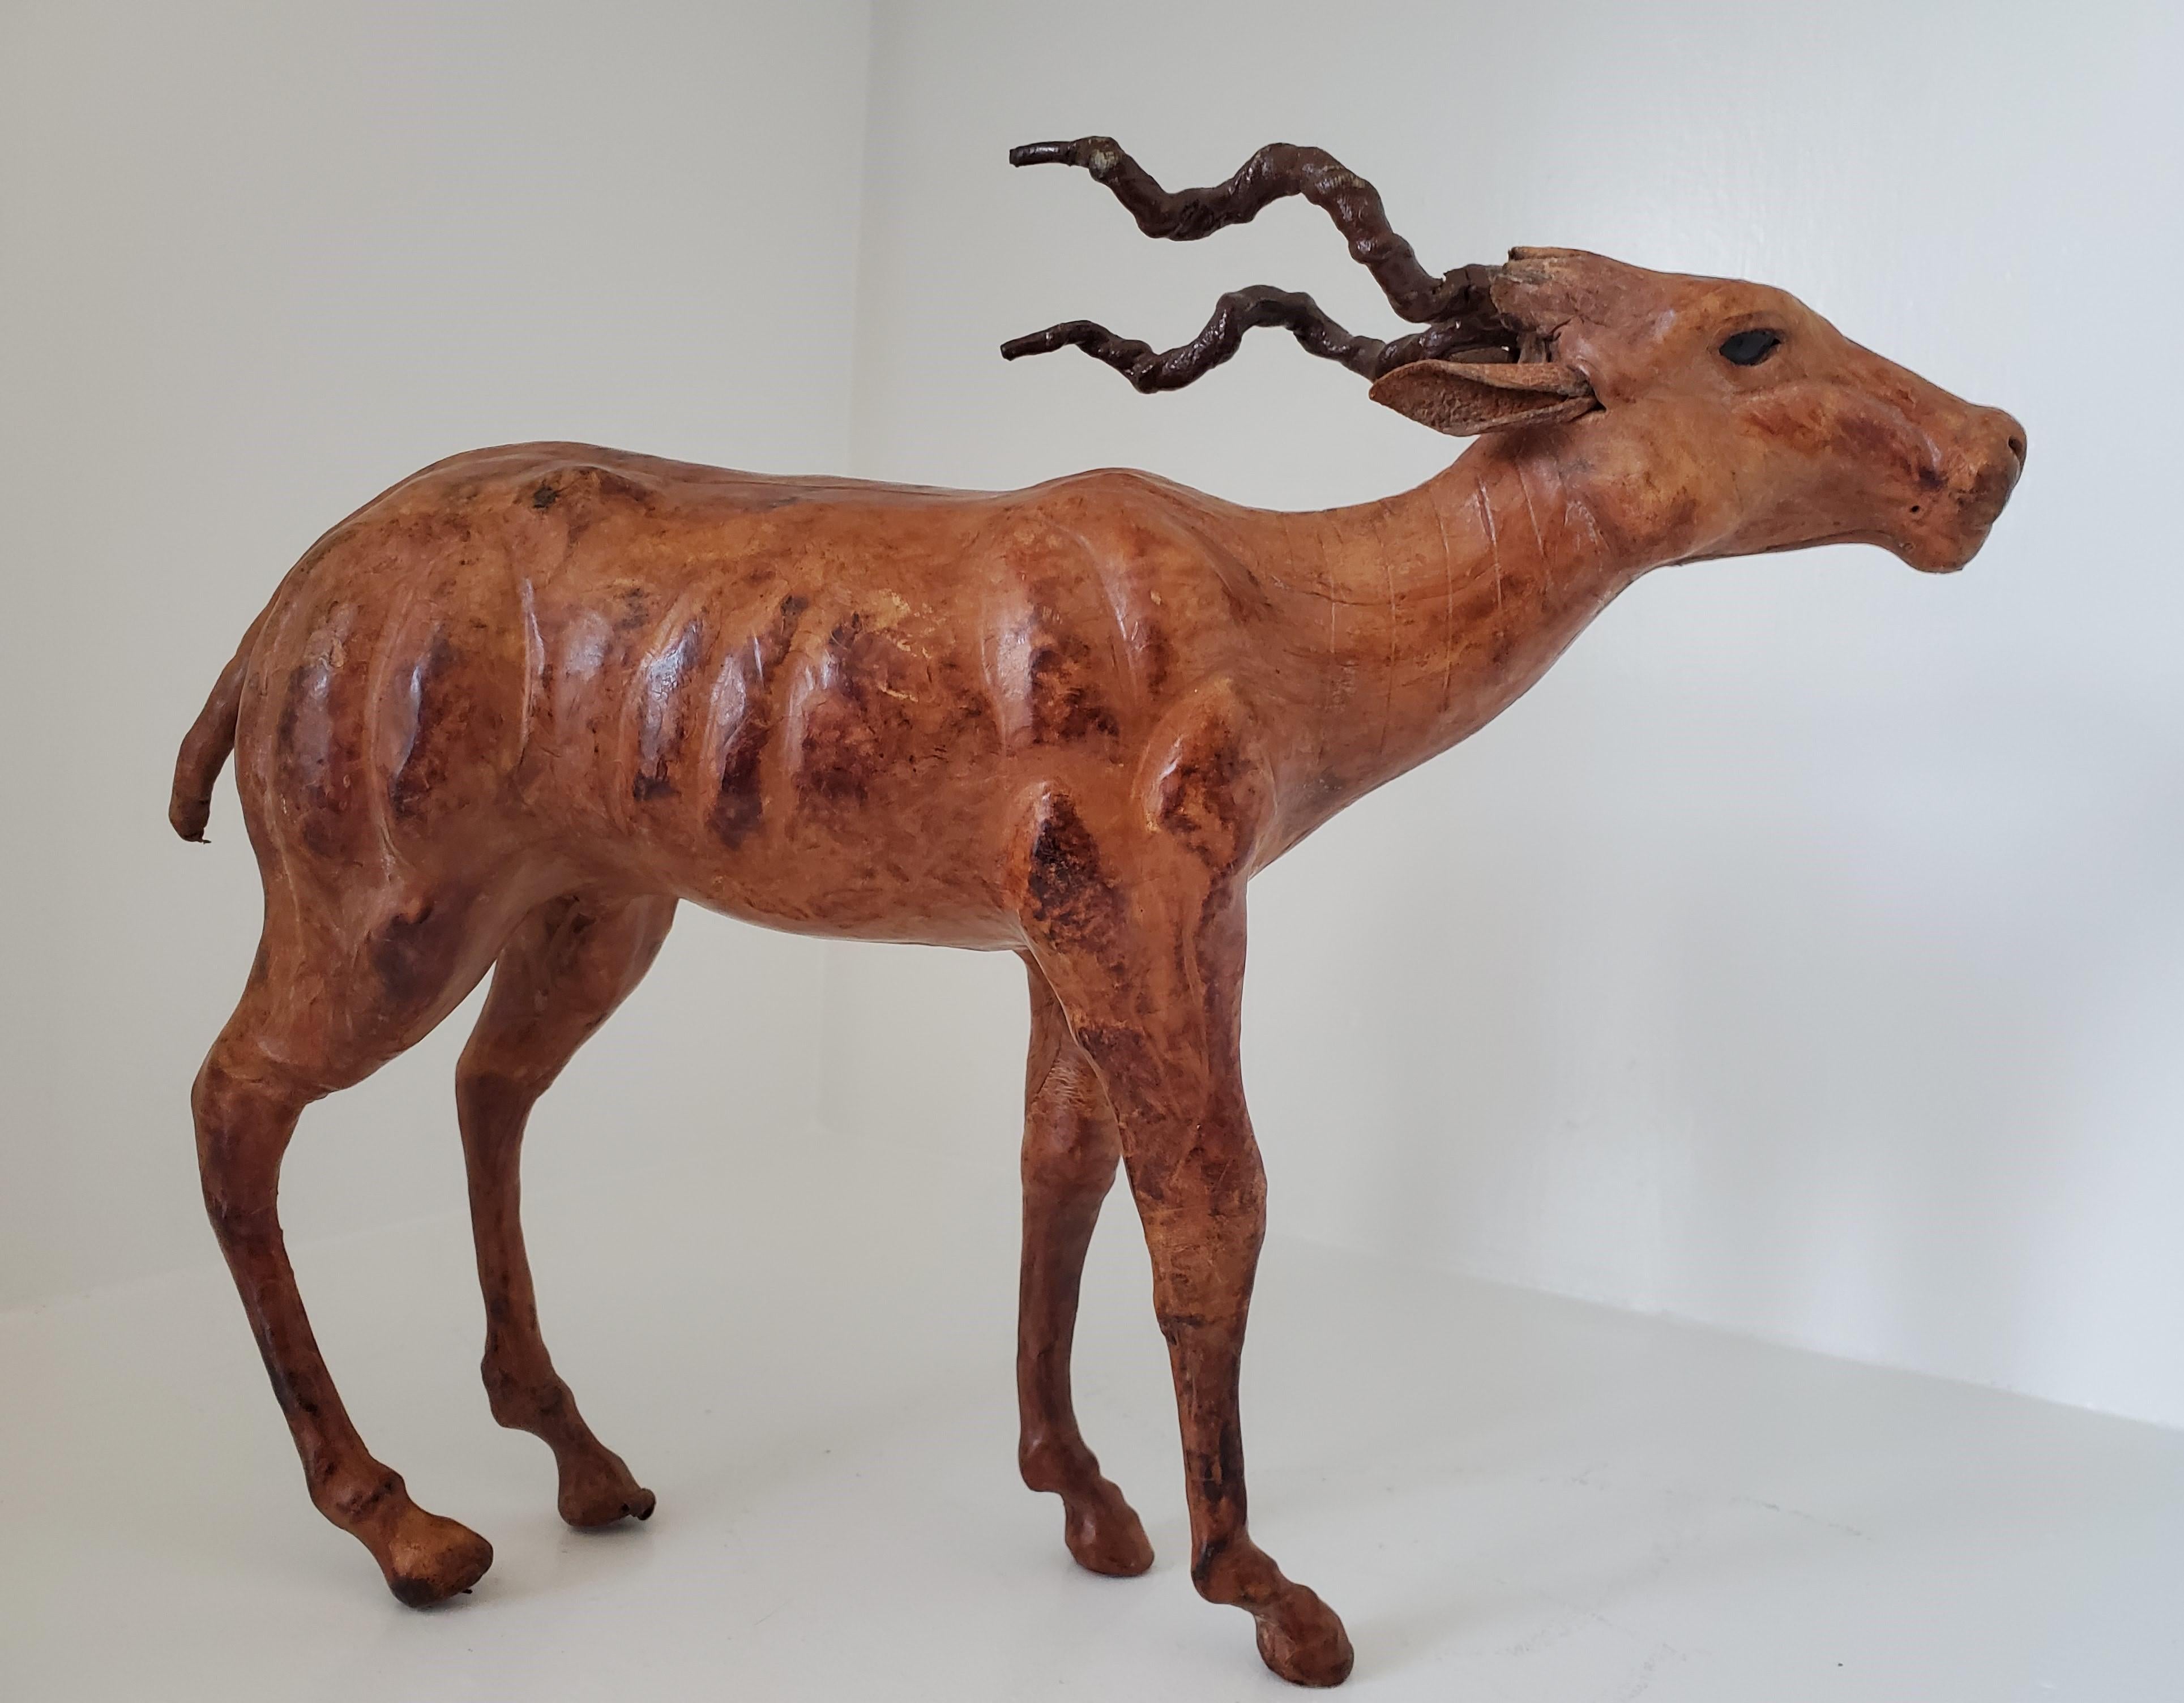 Animal Skin Vintage Sculpture - Wood and Leather Gazelle Likely from Liberty's London For Sale